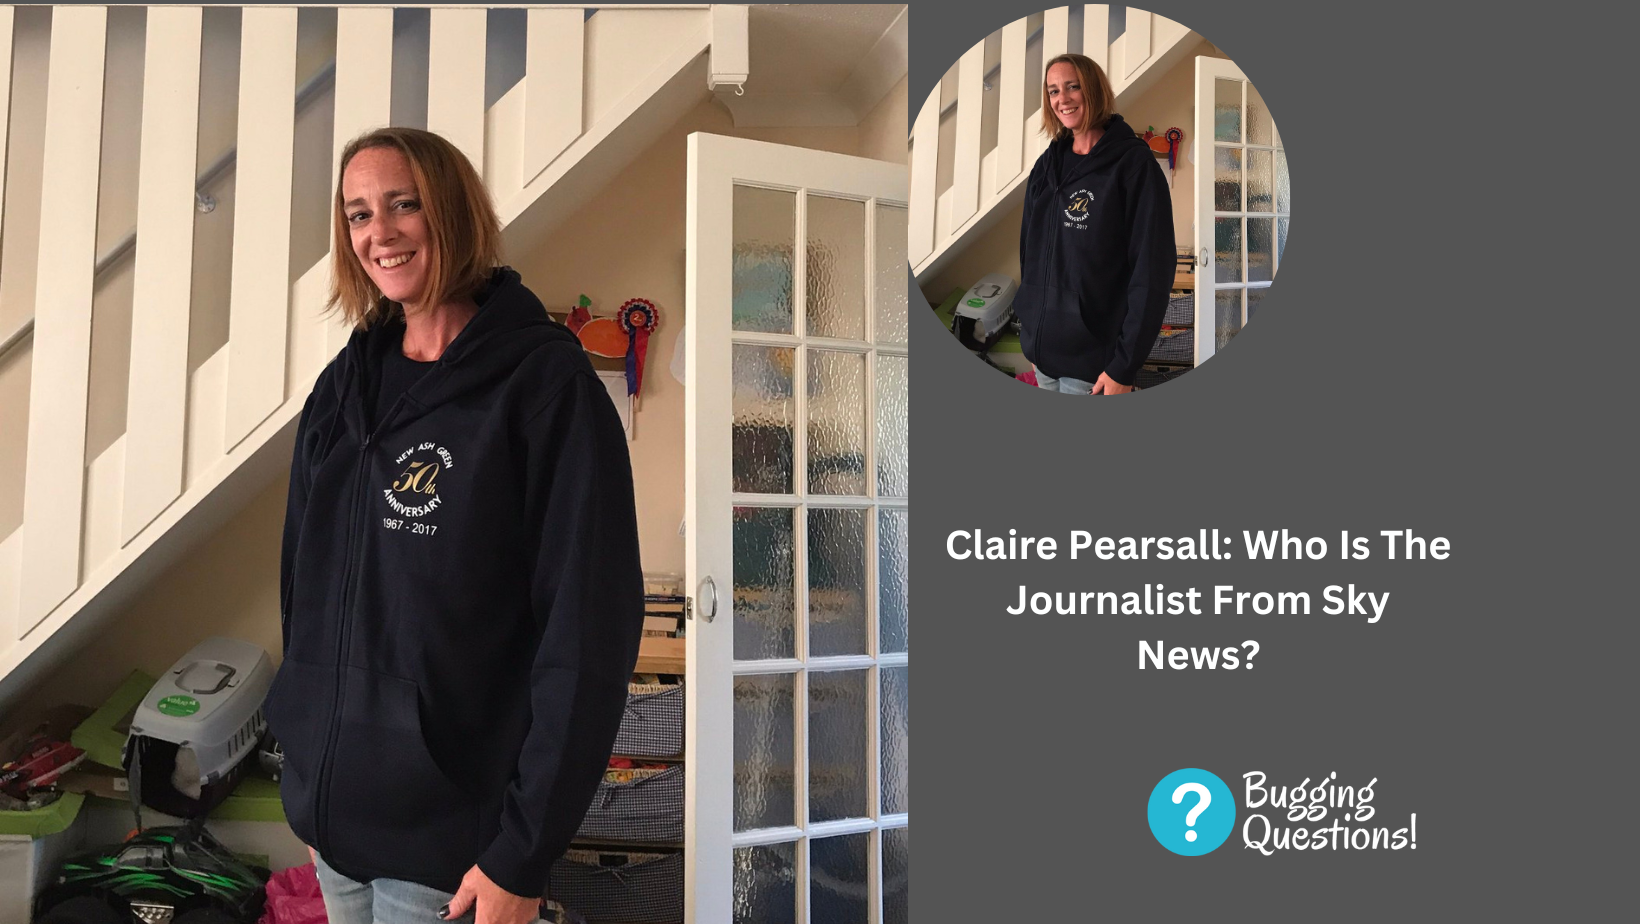 Claire Pearsall: Who Is The Journalist From Sky News?